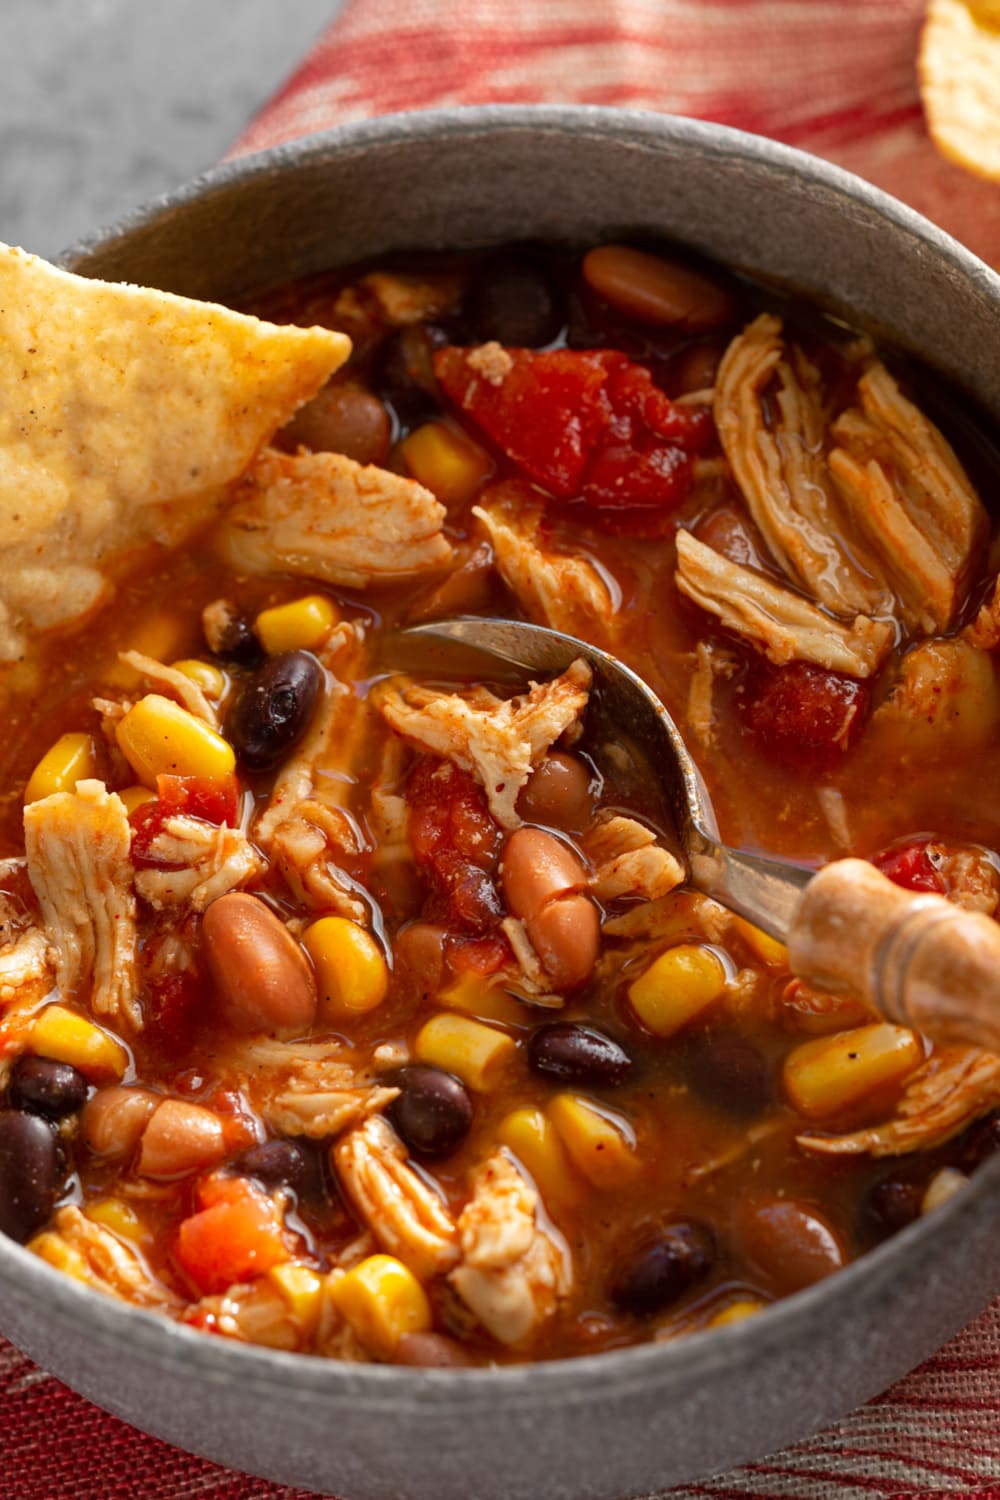 Soup with beans, tortilla and shredded chicken on a pot.